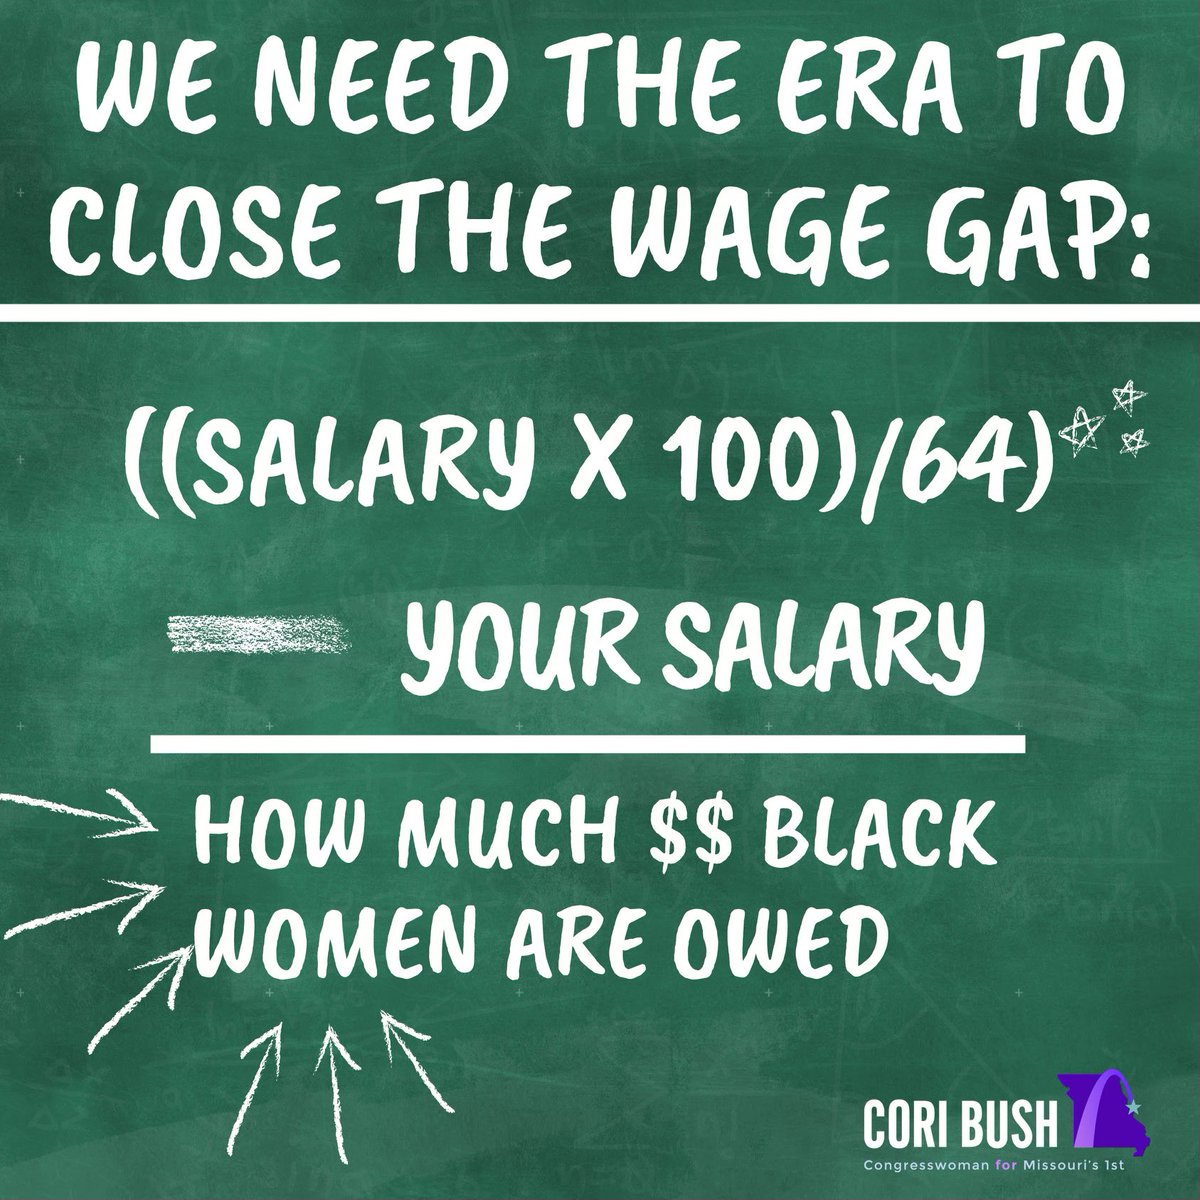 Black women make 64 cents to every dollar a white man earns.

The Equal Rights Amendment would finally close the gender wage gap.

On #BlackWomensEqualPayDay, calculate how much Black women are owed ⬇️